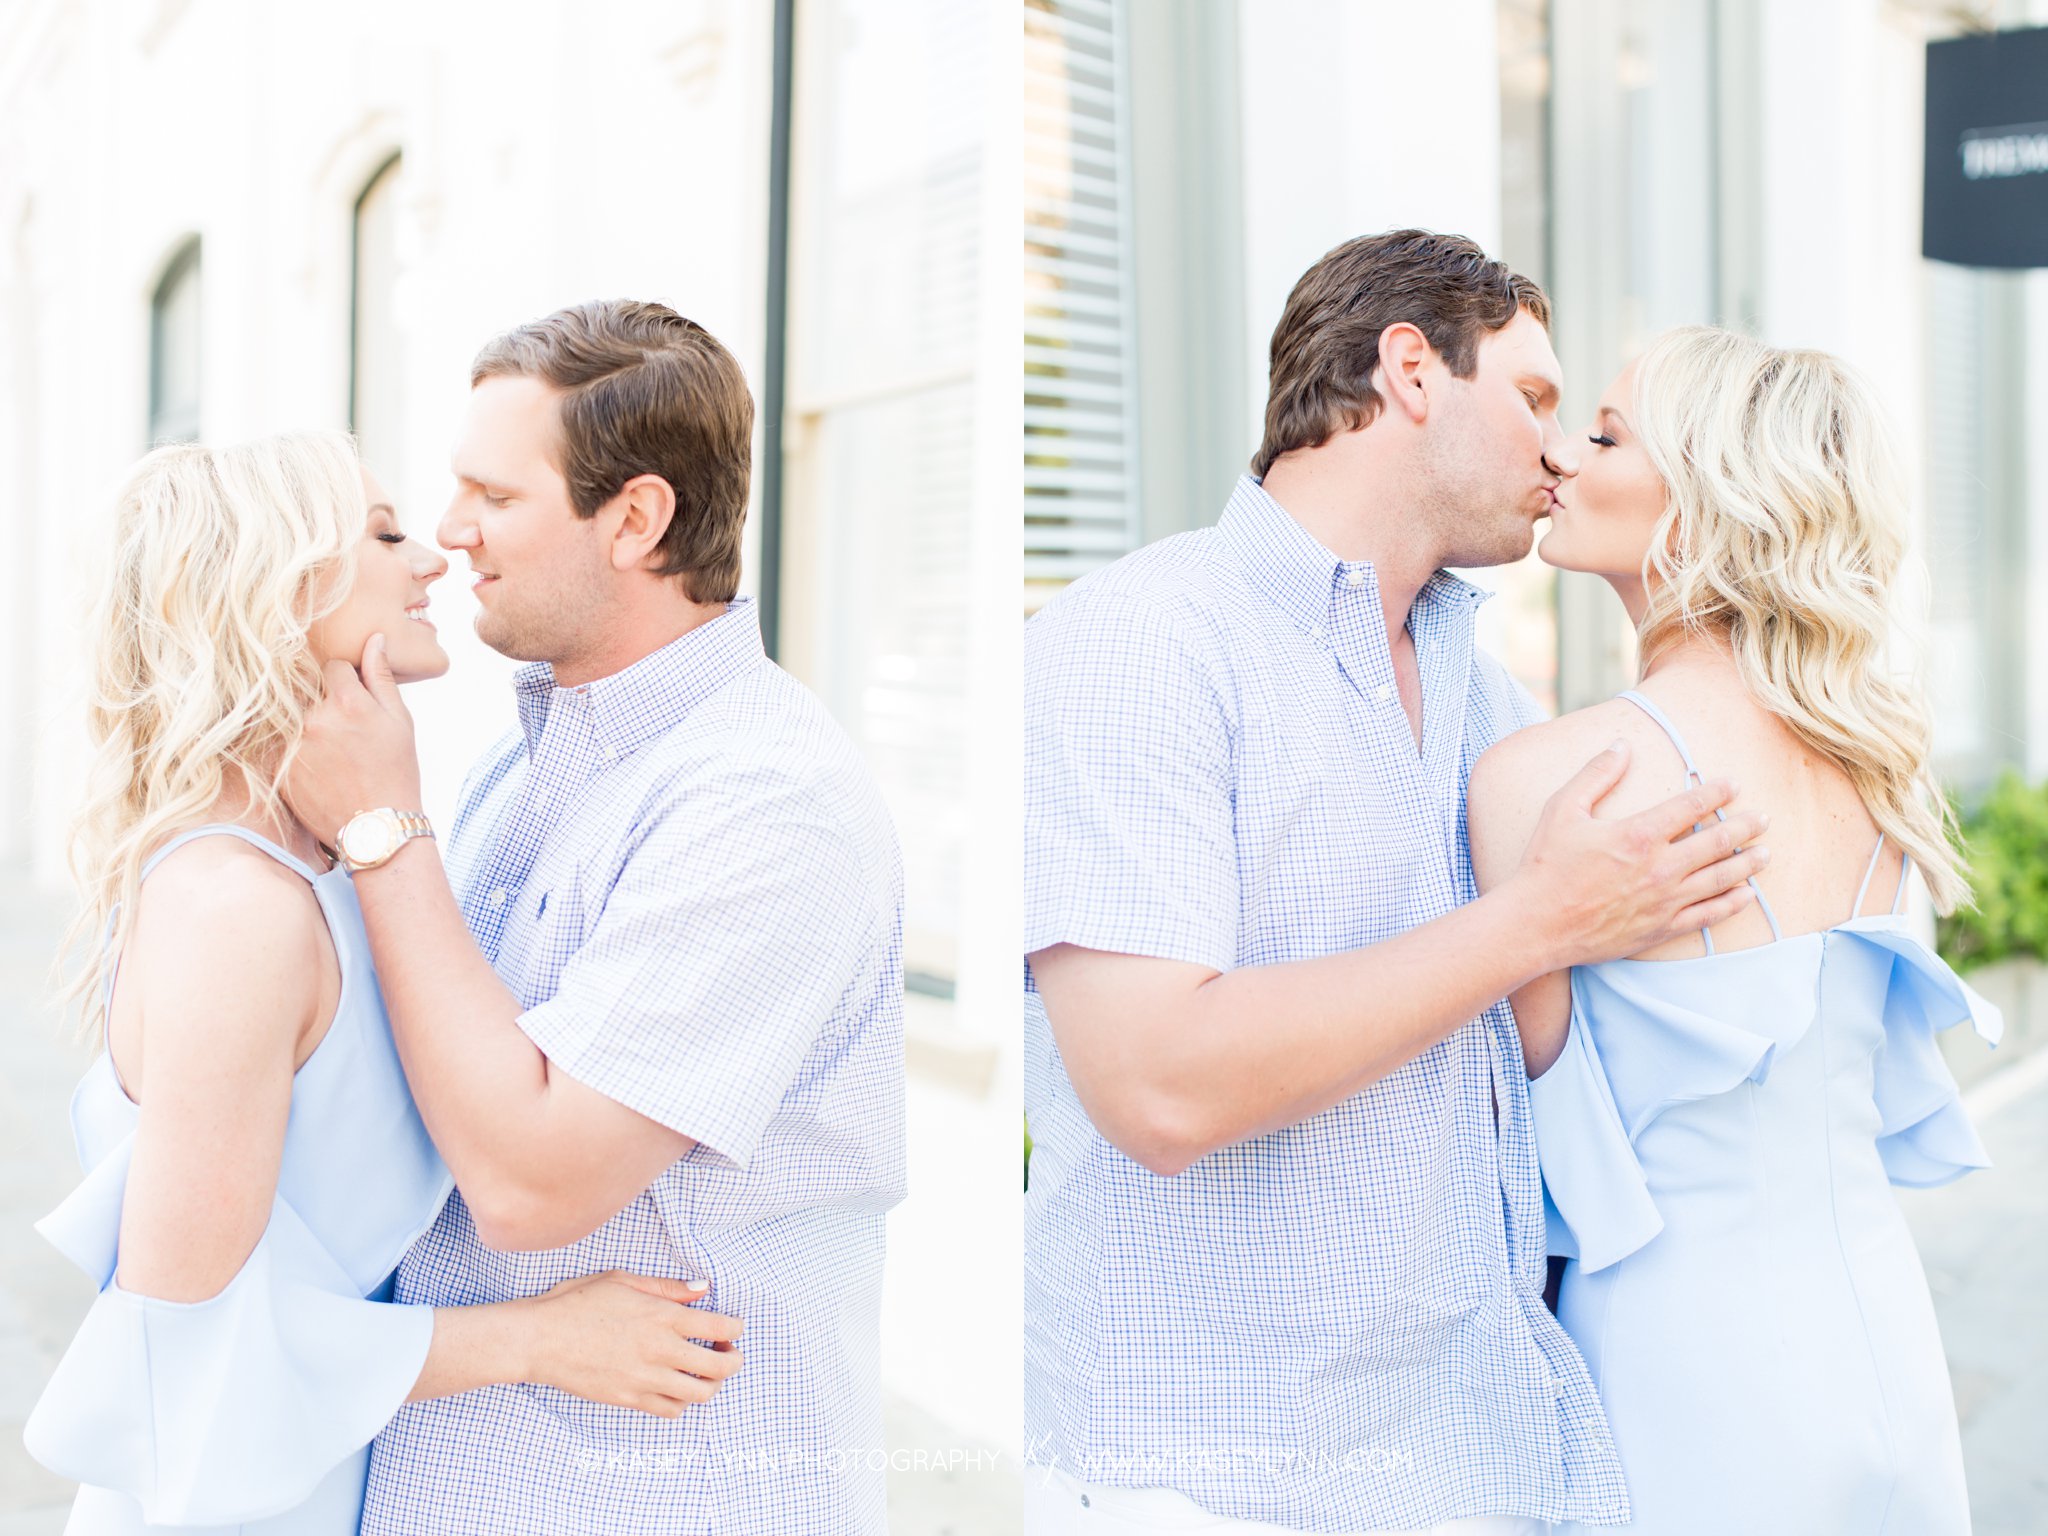 Tremont House Engagement Session / Kasey Lynn Photography